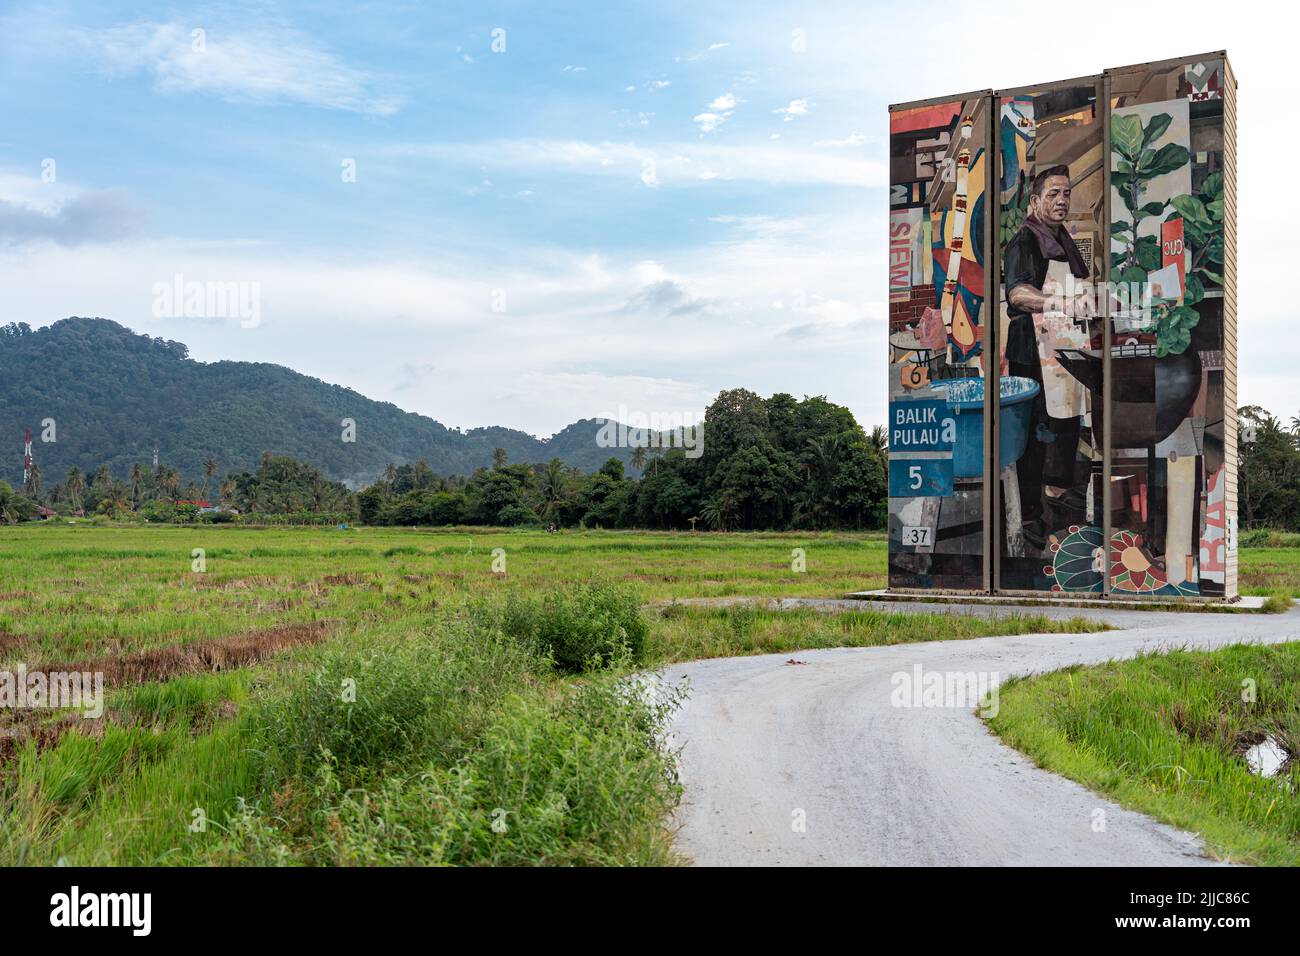 Penang Container Art located in the middle of paddy field. This art currently display at Balik Pulau, Penang Island. Stock Photo